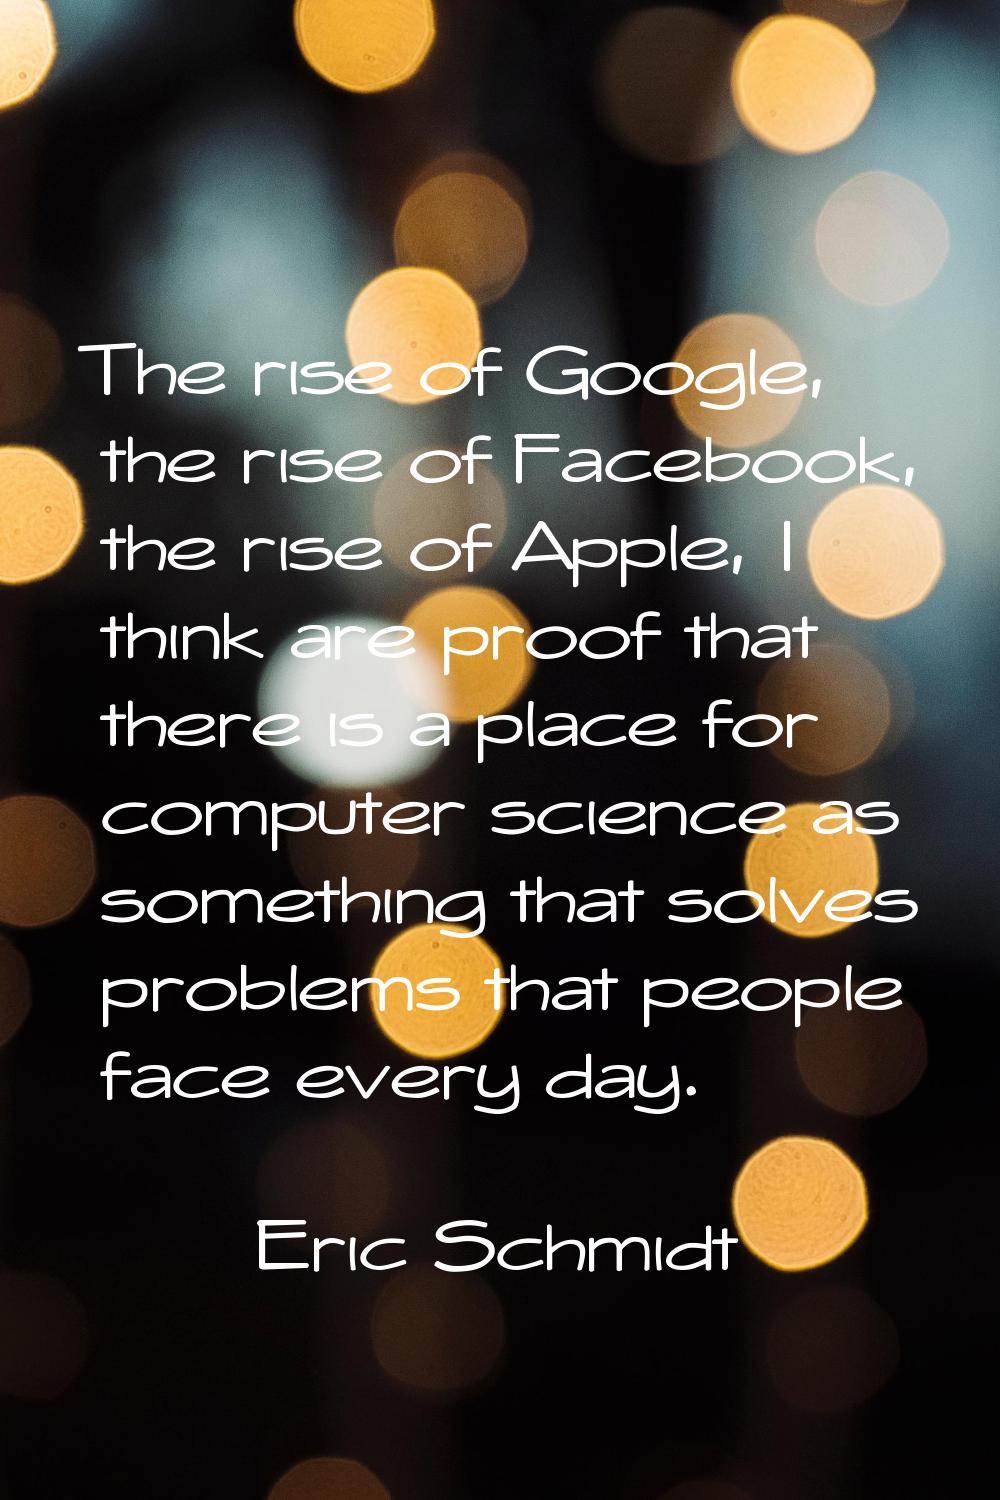 The rise of Google, the rise of Facebook, the rise of Apple, I think are proof that there is a plac